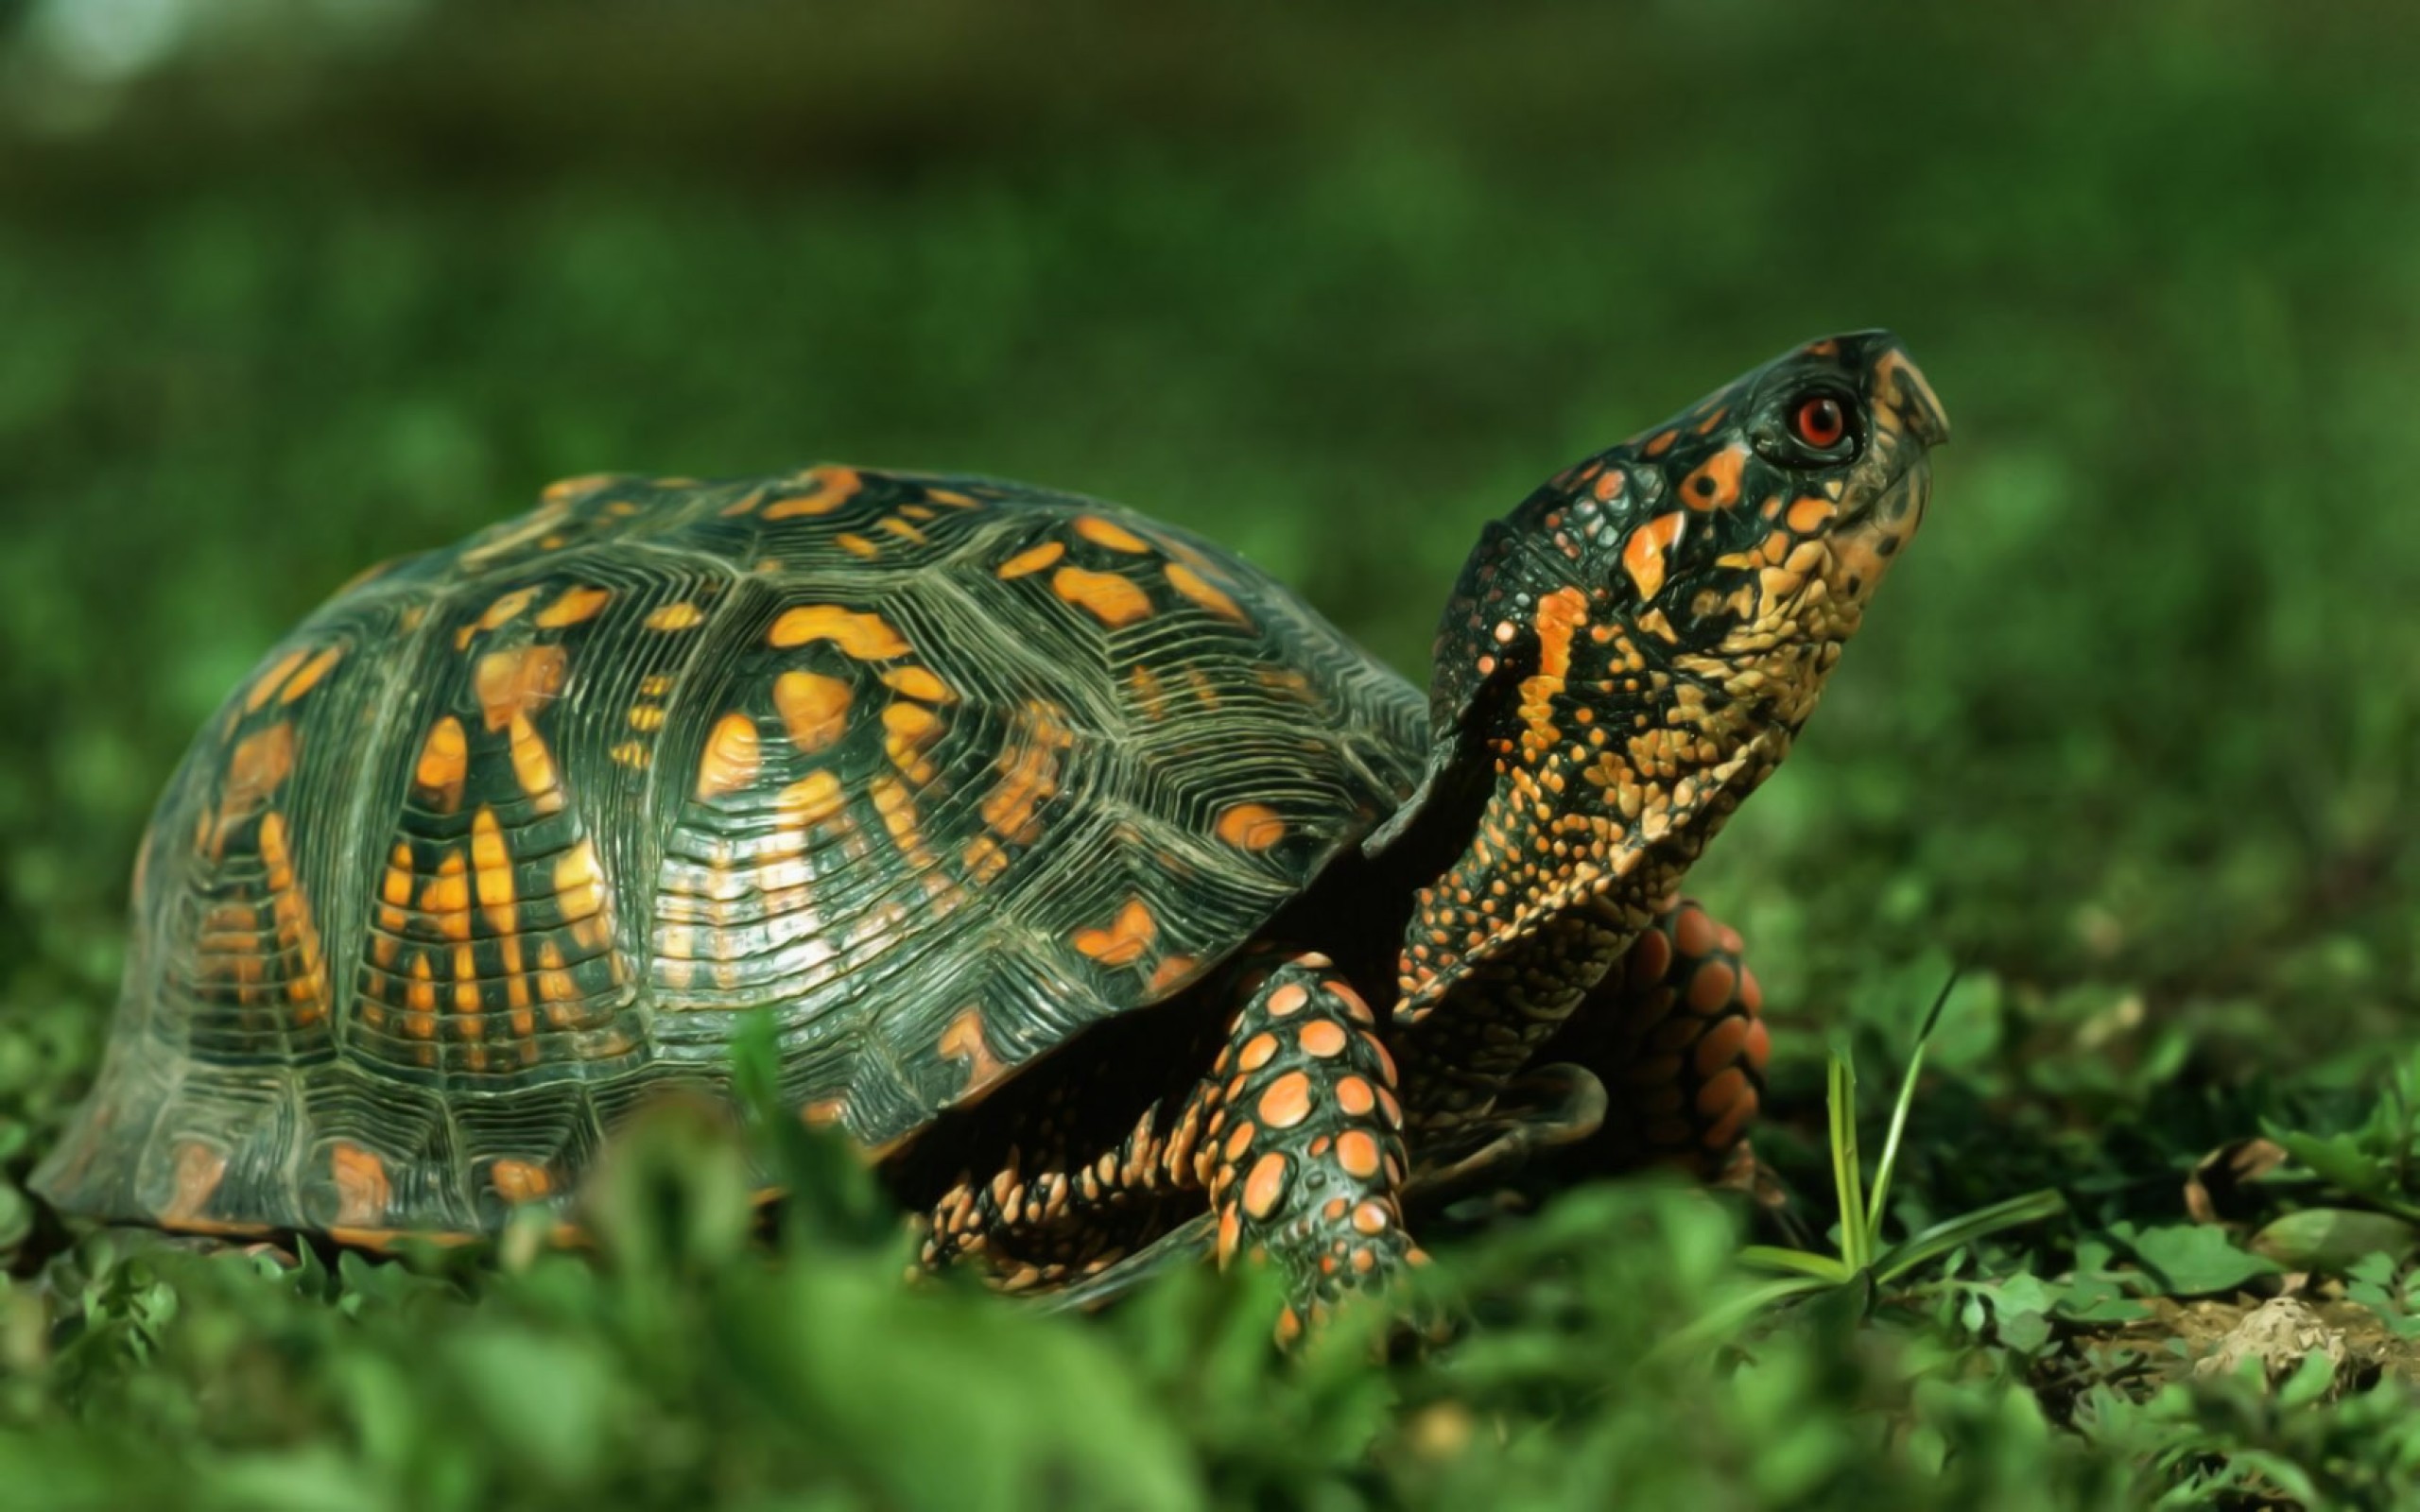 Can we lighten up a little and post turtle or tortoise pictures here?